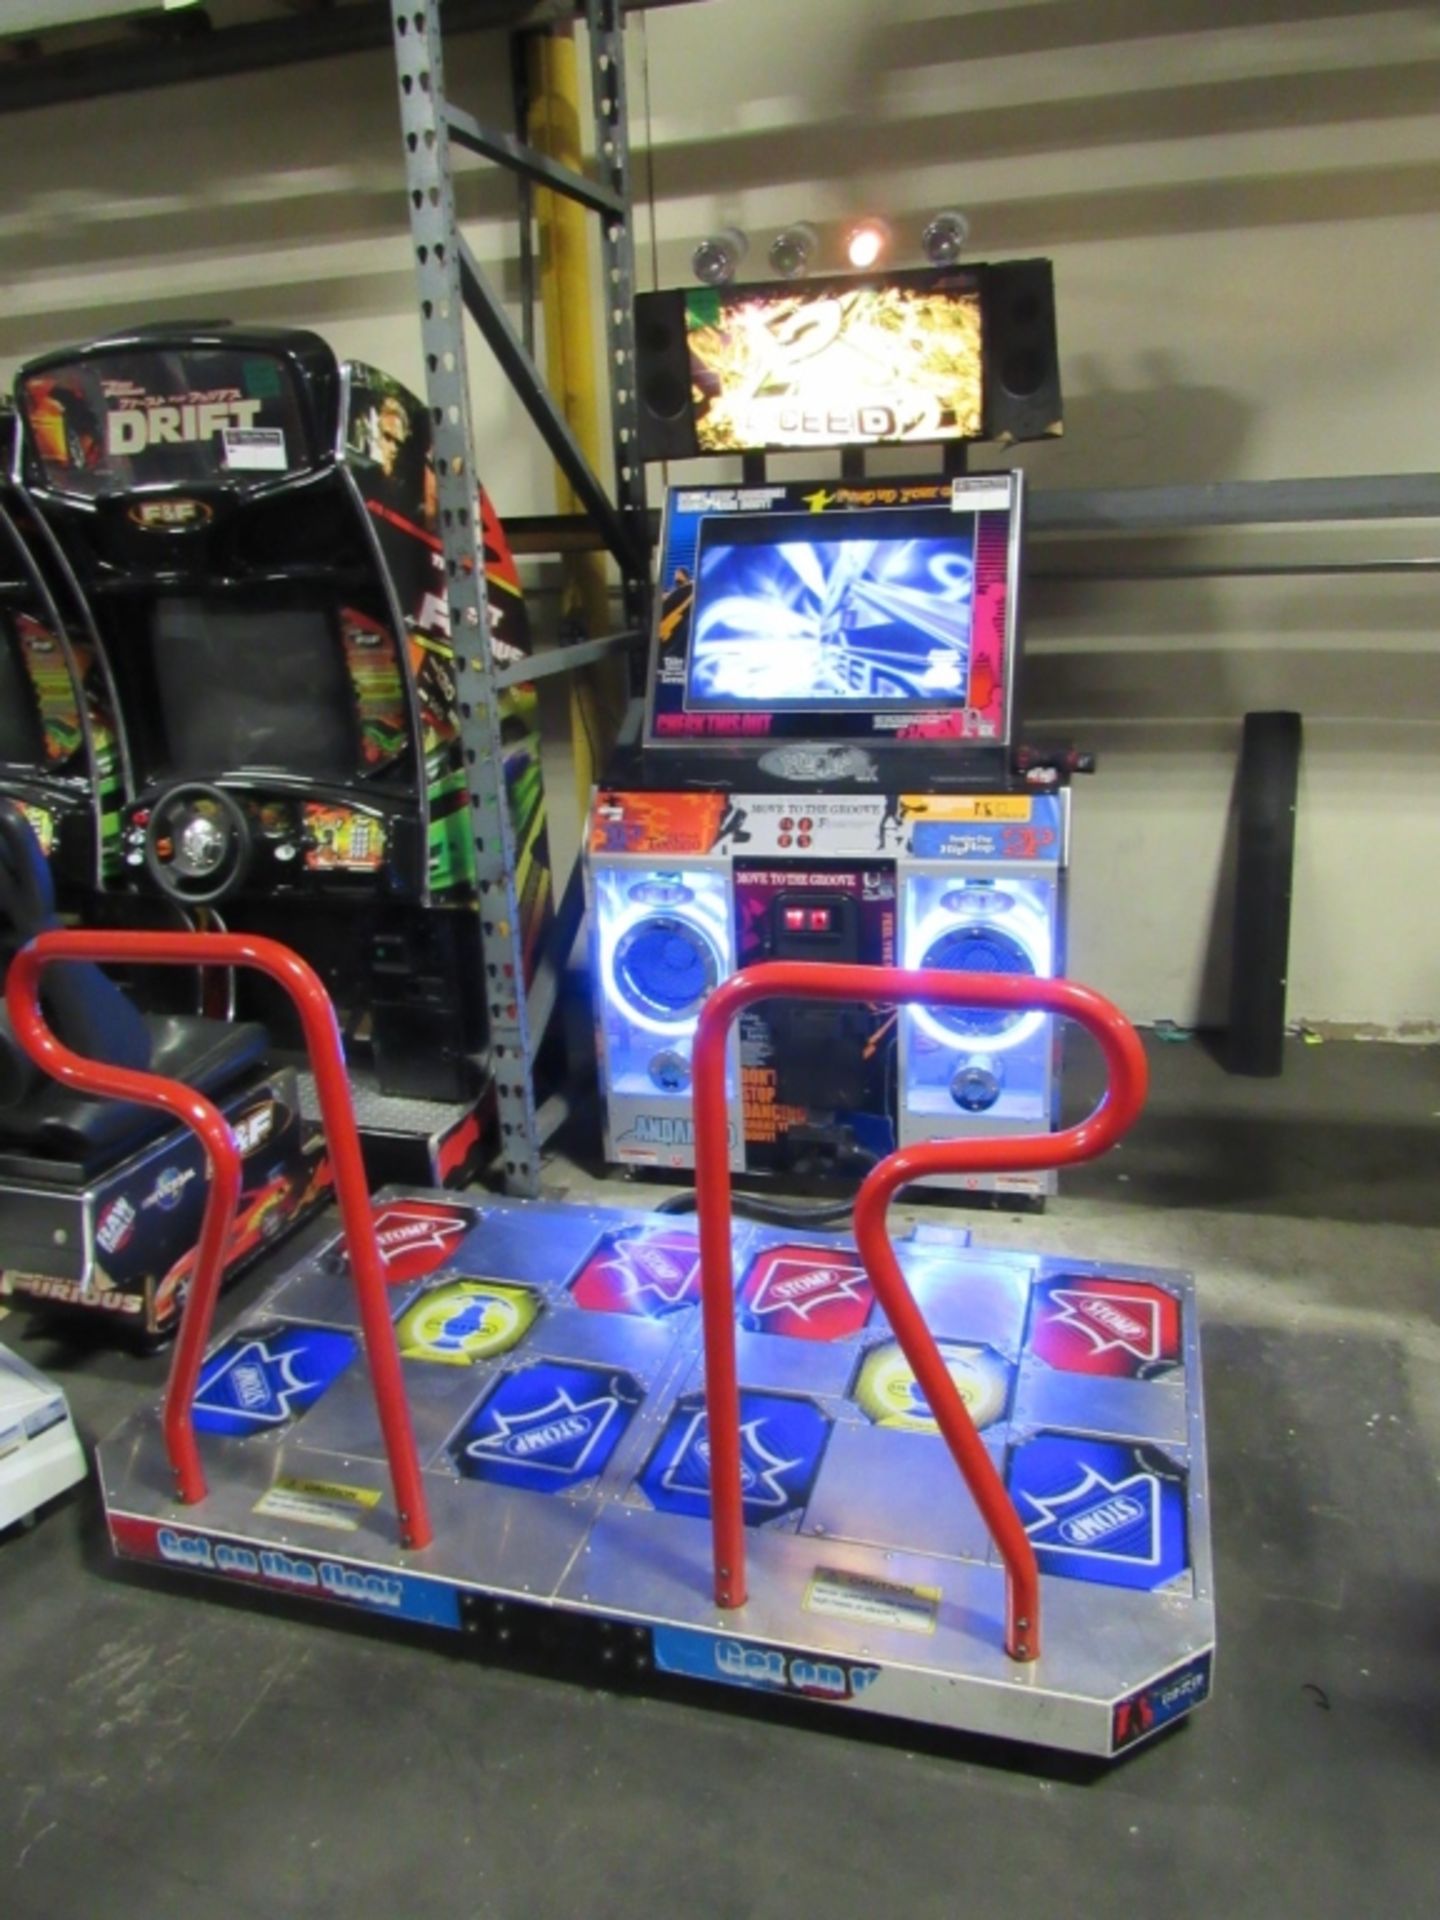 PUMP IT UP NX EXCEED 2 DANCE ARCADE GAME - Image 4 of 5